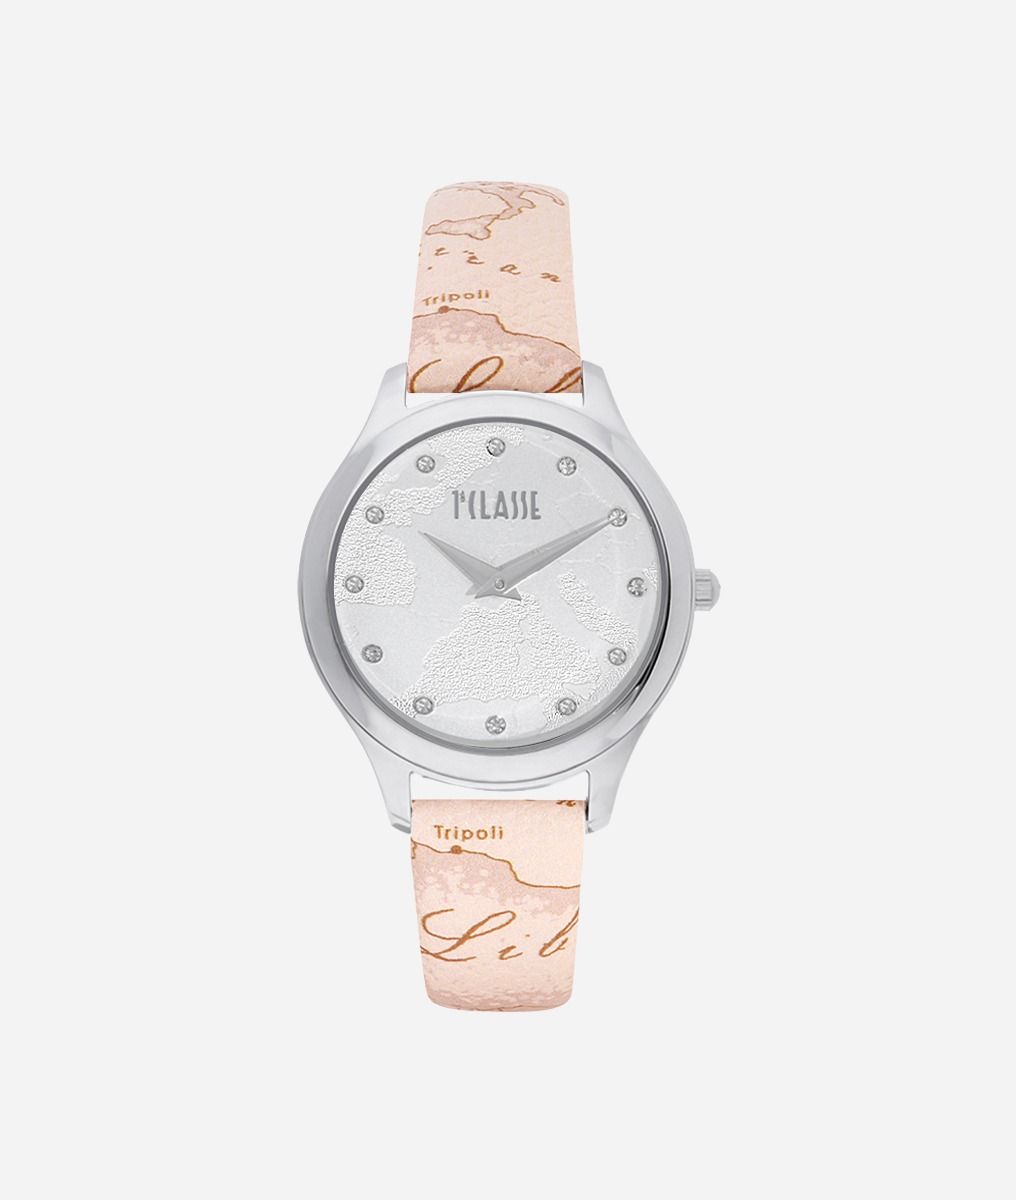 Ischia Watch with Geo Nude print leather strap,front